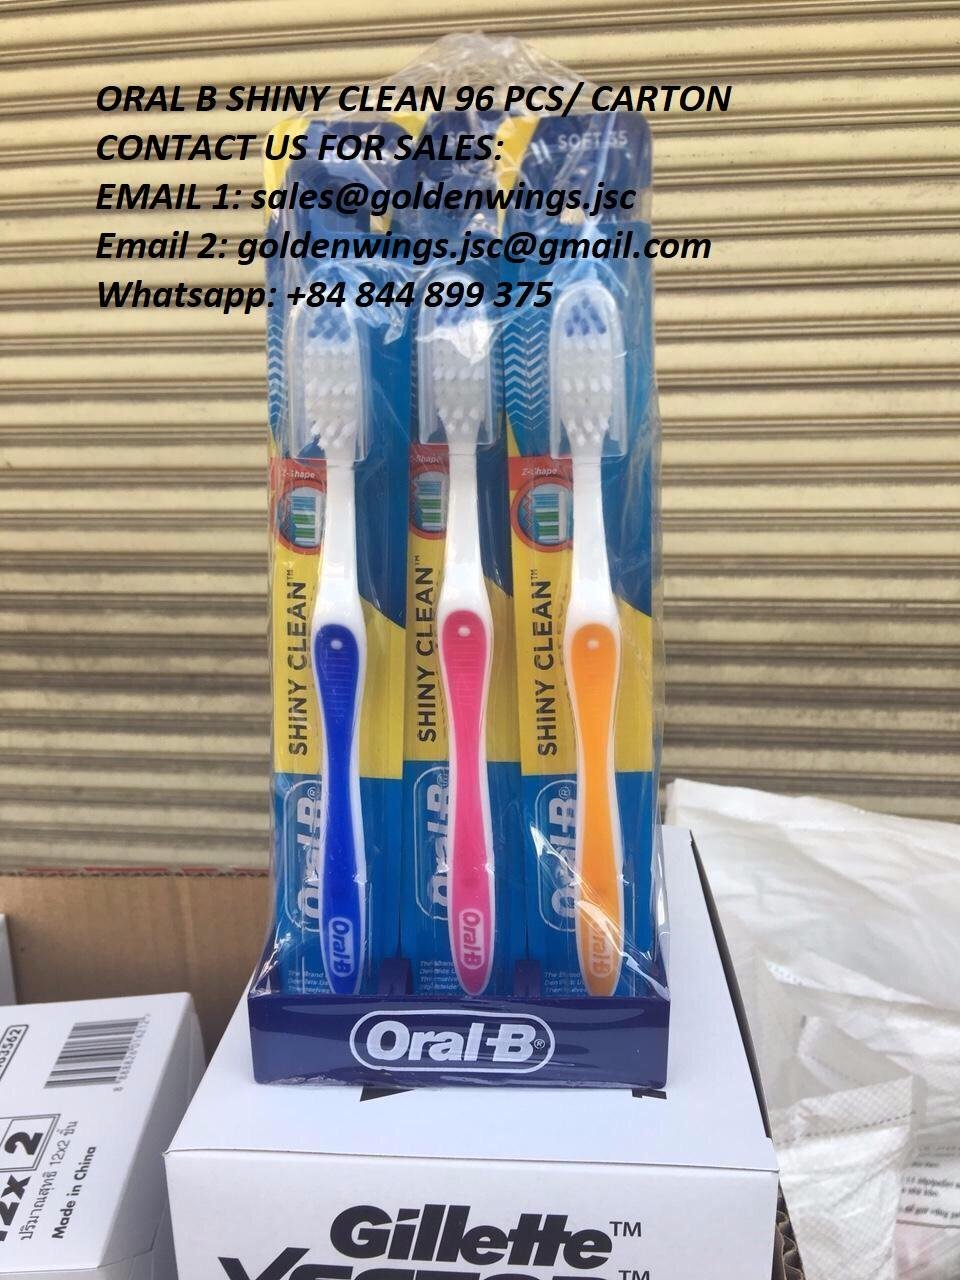 Oral B Shiny Clean - A401 (Vietnam Trading Company) - Personal Care  Appliance - Home Supplies Products - DIYTrade China manufacturers